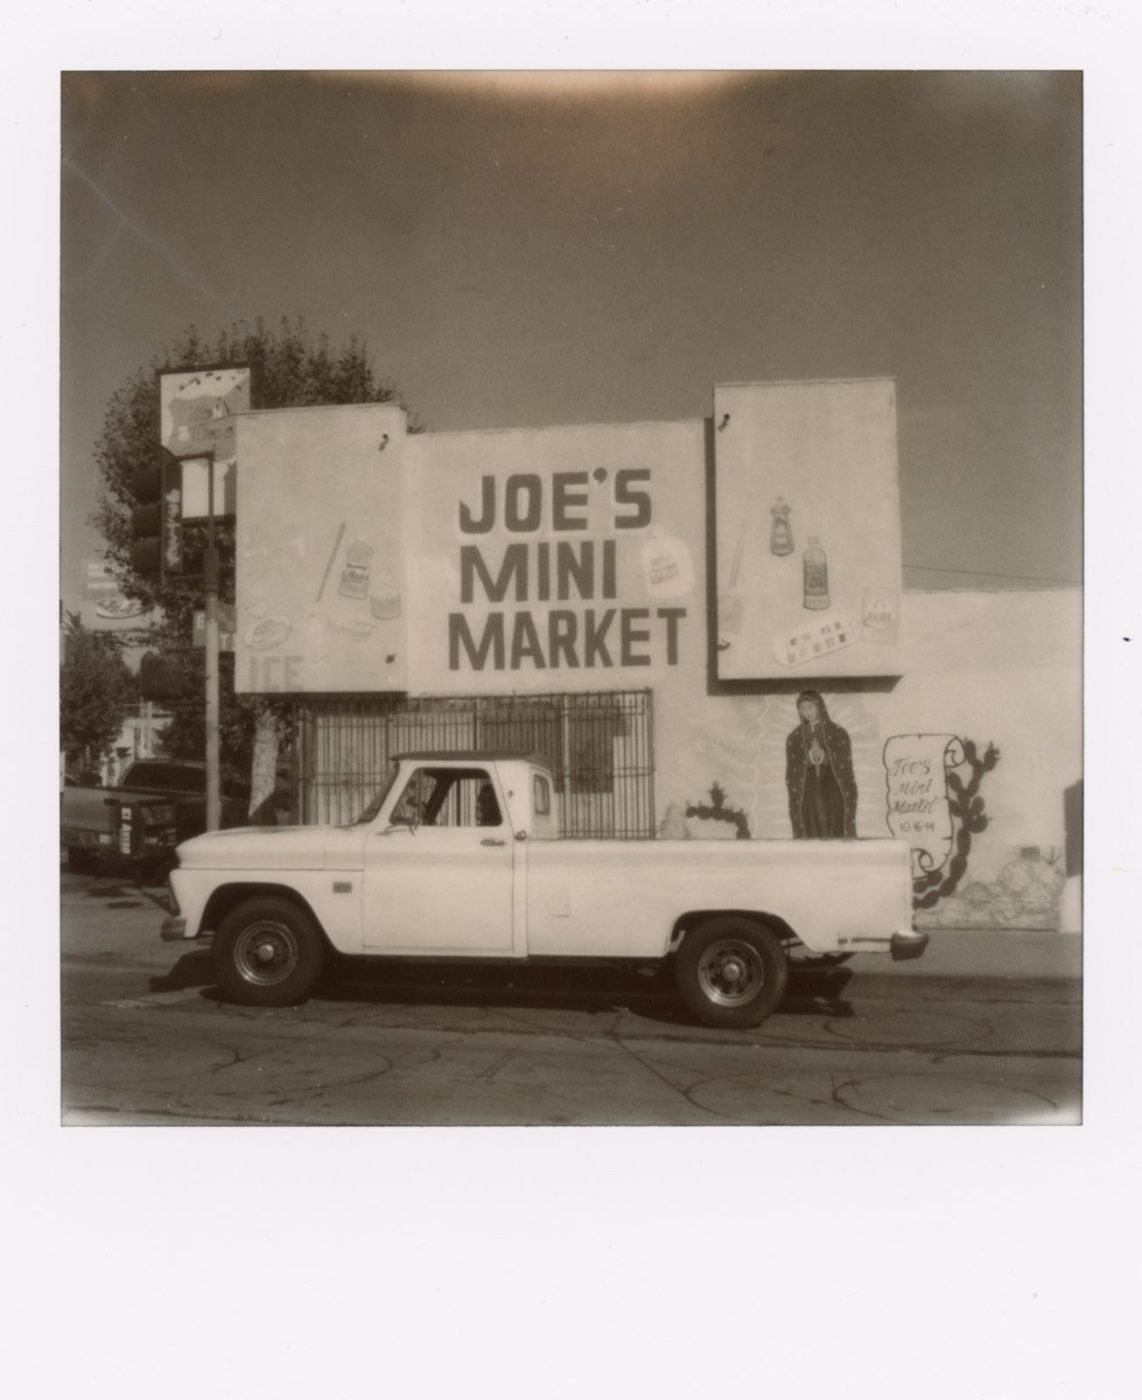 Film Festival promo showing white truck in front of store called Joe's Mini Market